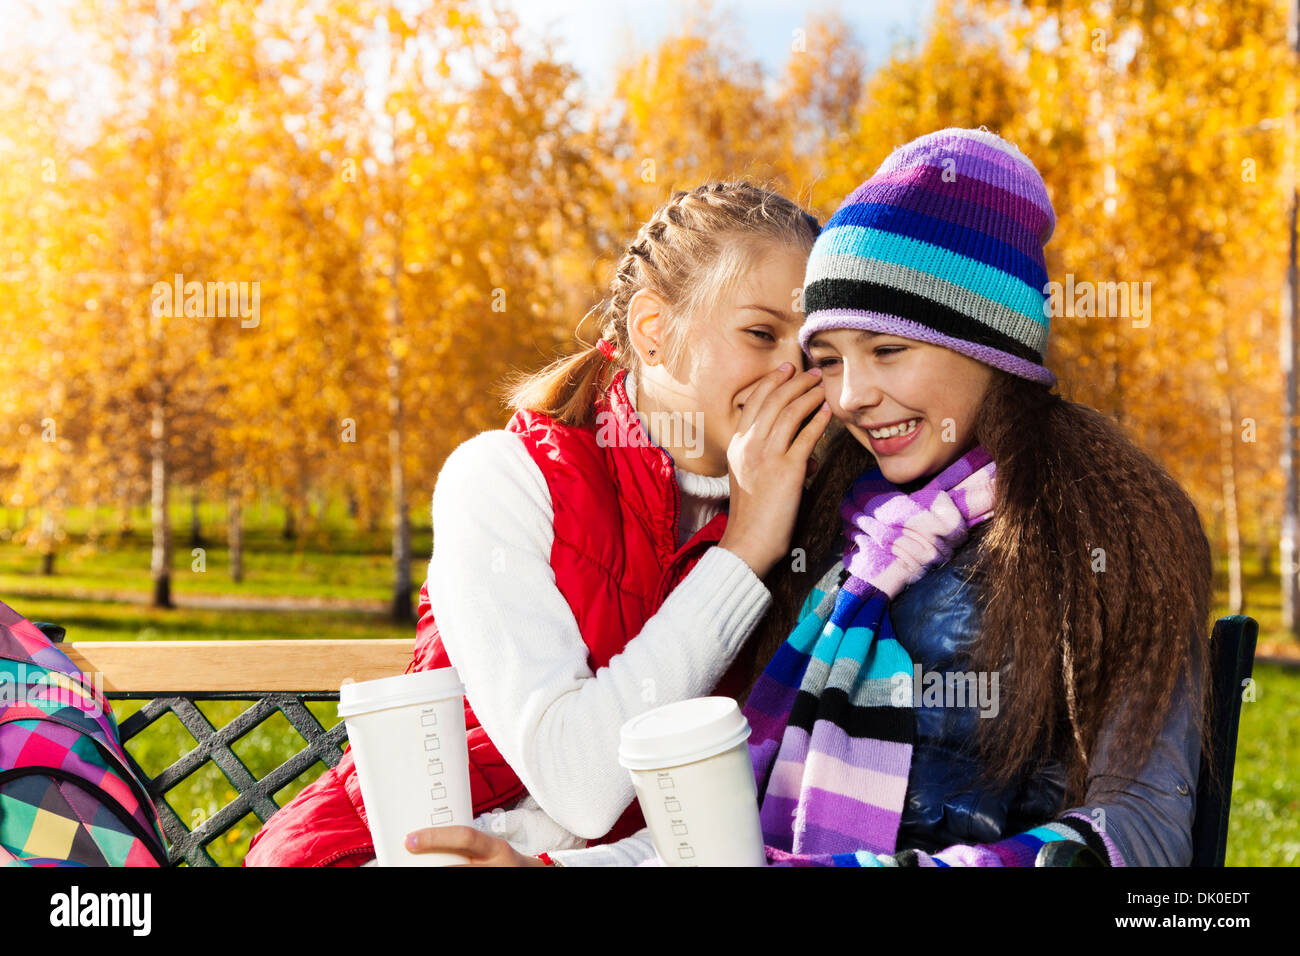 Two happy girls whispering 11 years old sitting on the bench in autumn park Stock Photo